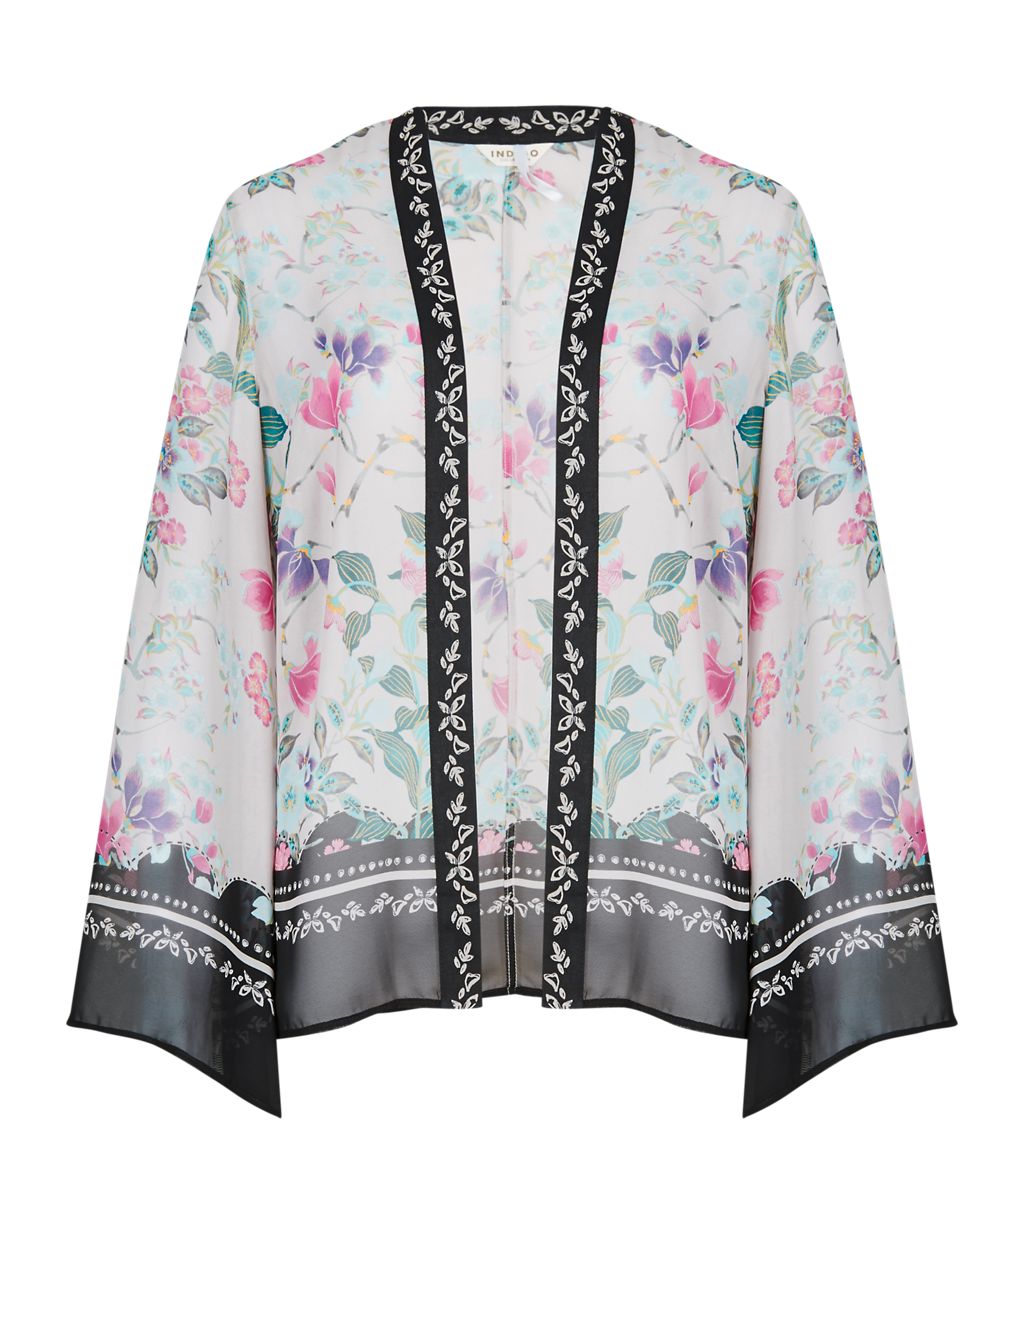 Japanese Floral Cover-Up Kimono Top 1 of 4